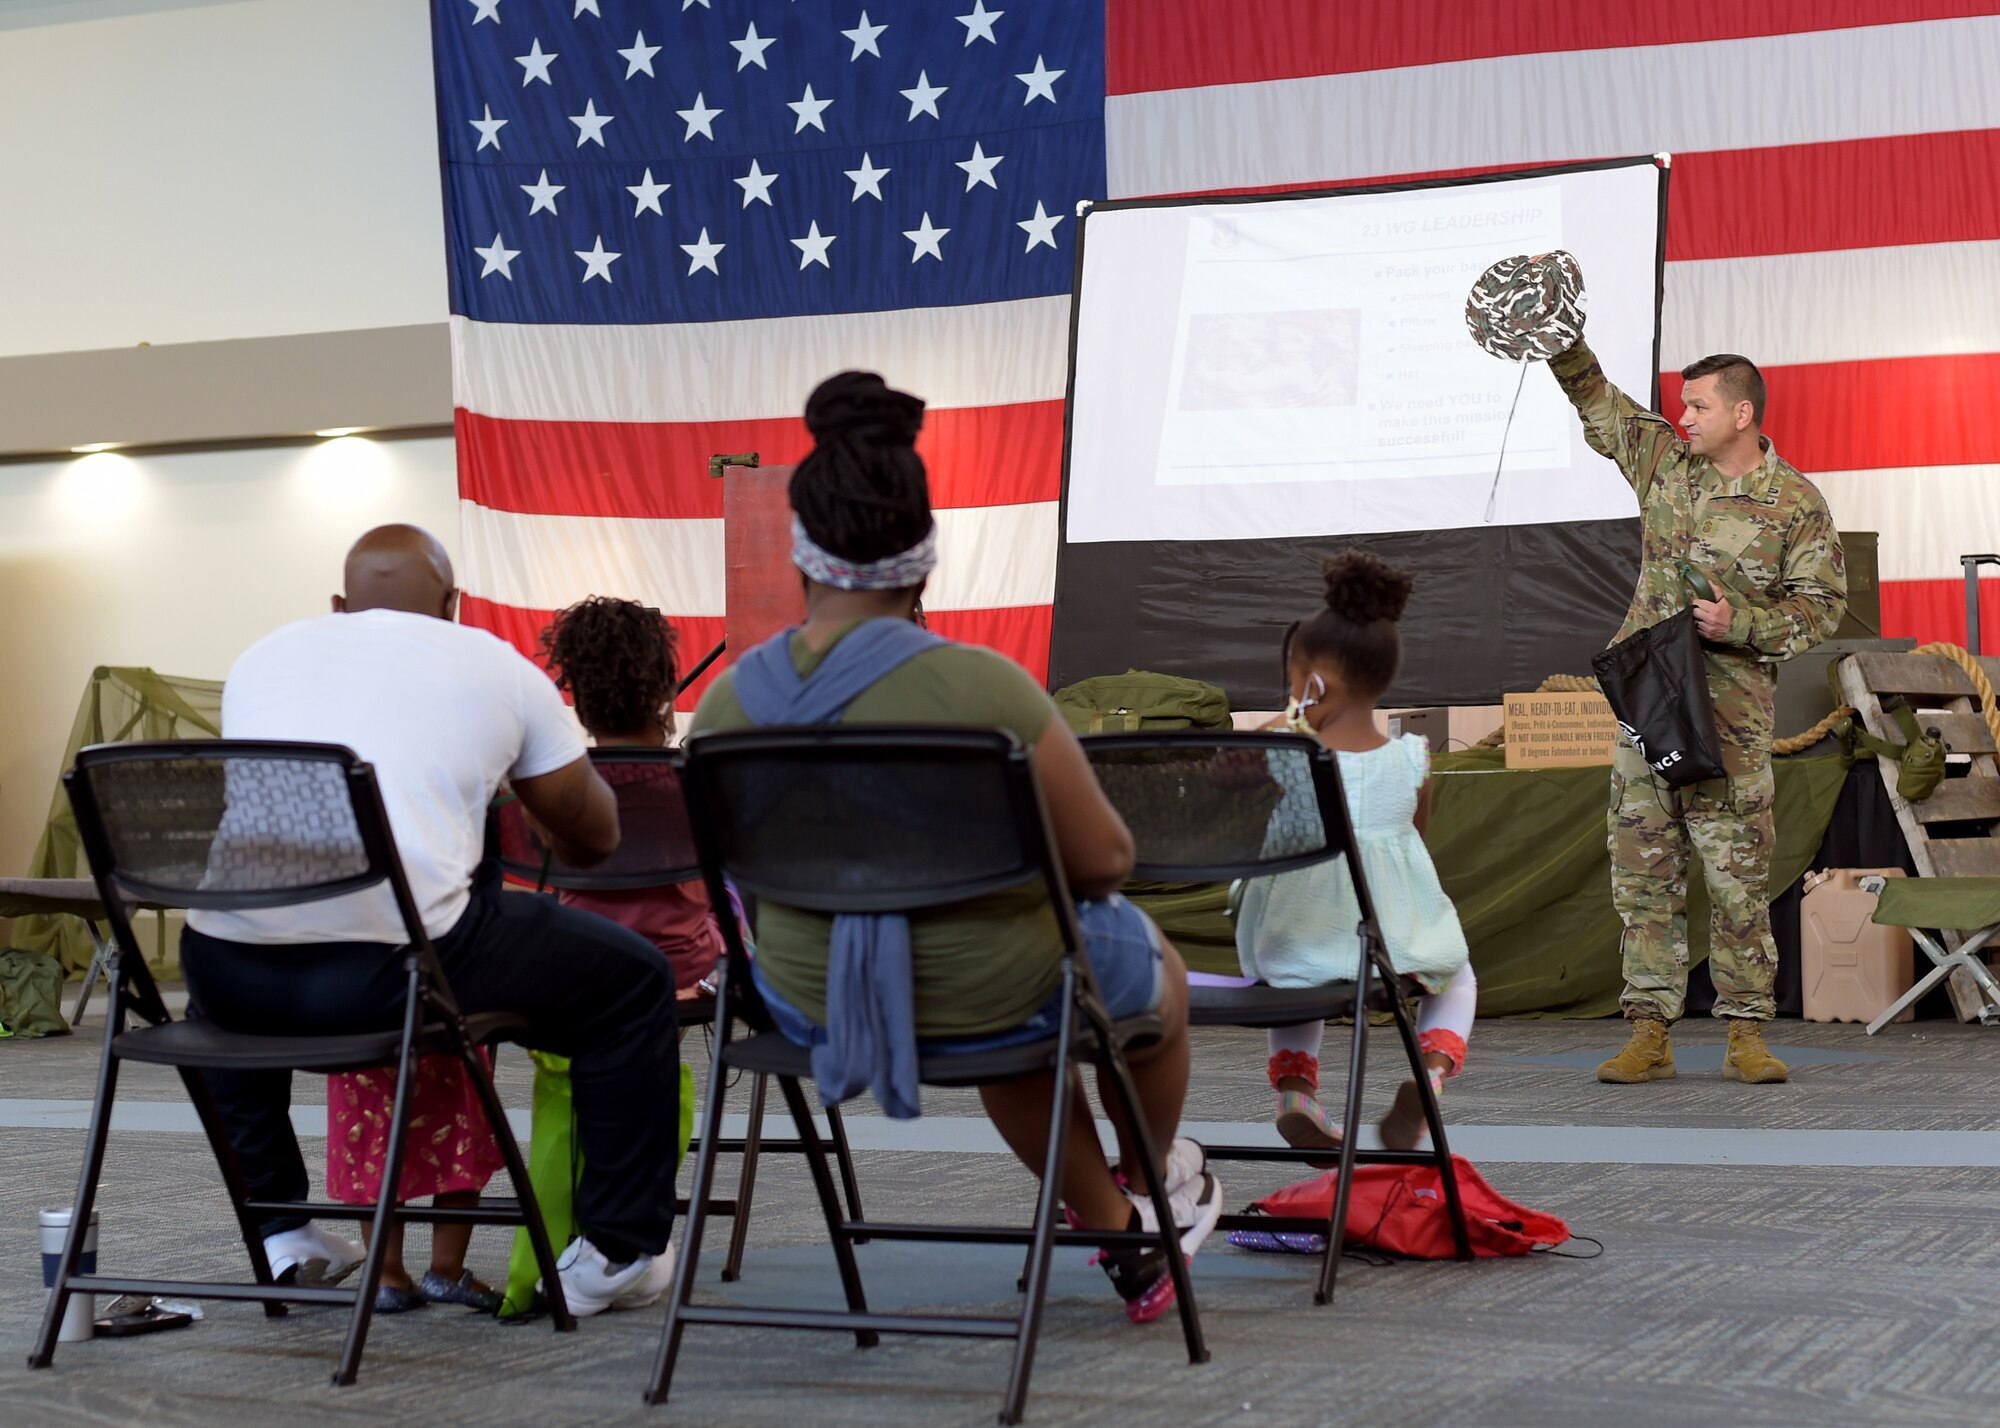 Airman briefing kids at event